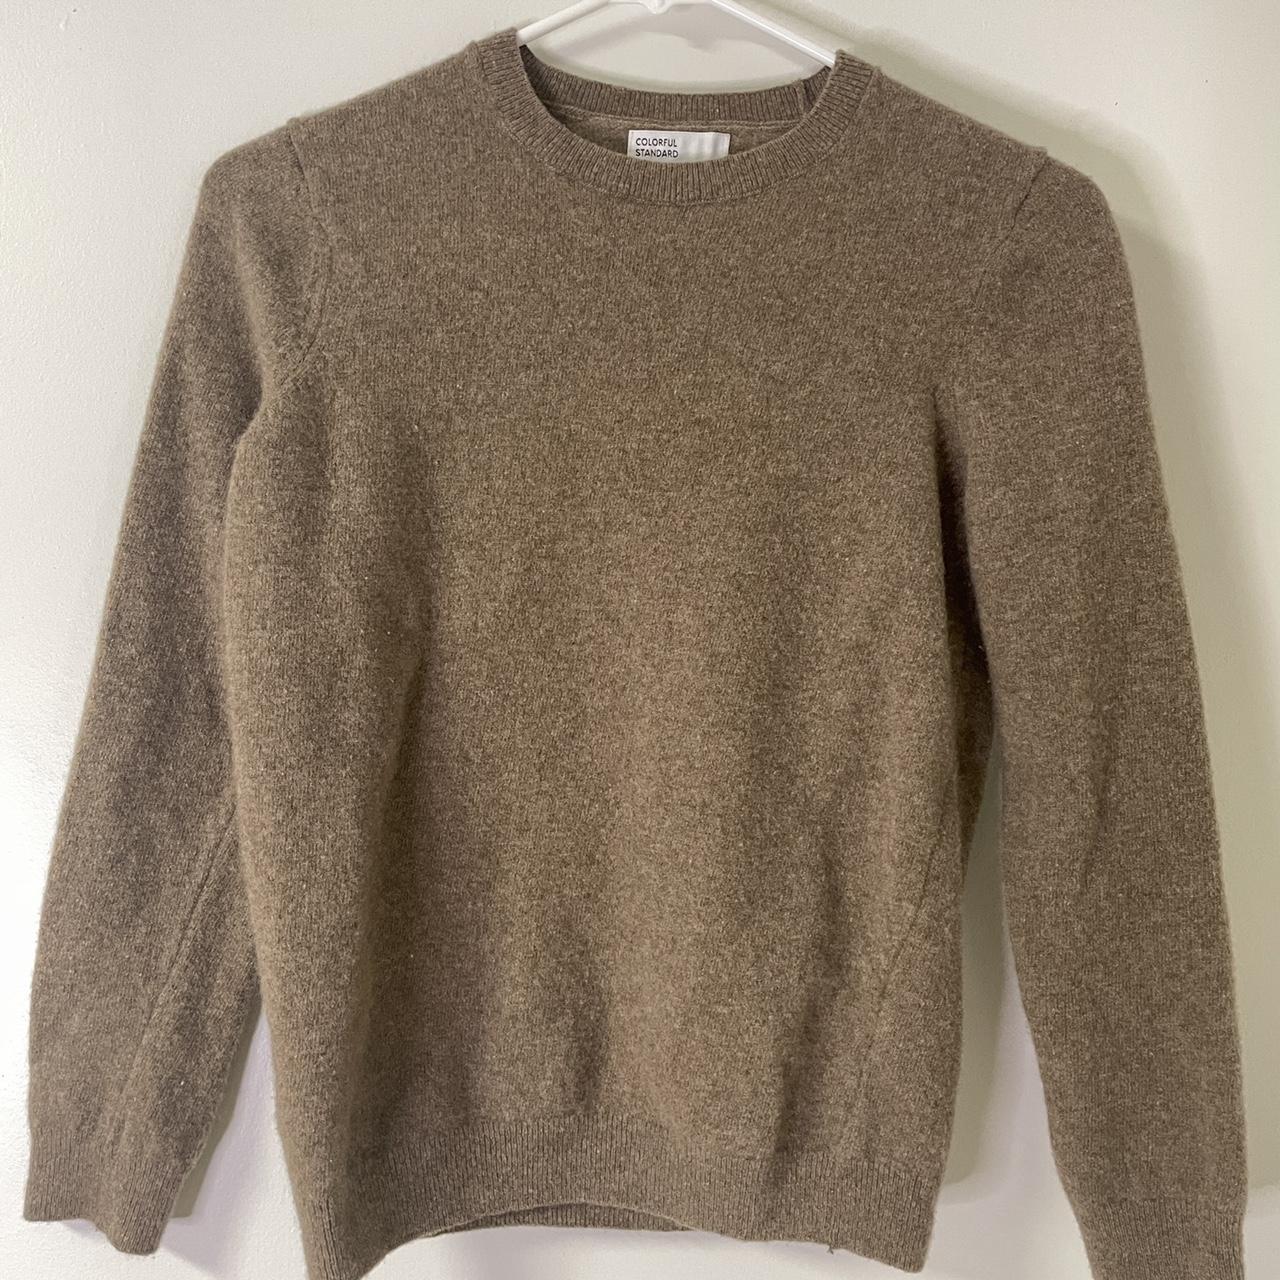 Colorful Standard Women's Brown and Tan Jumper